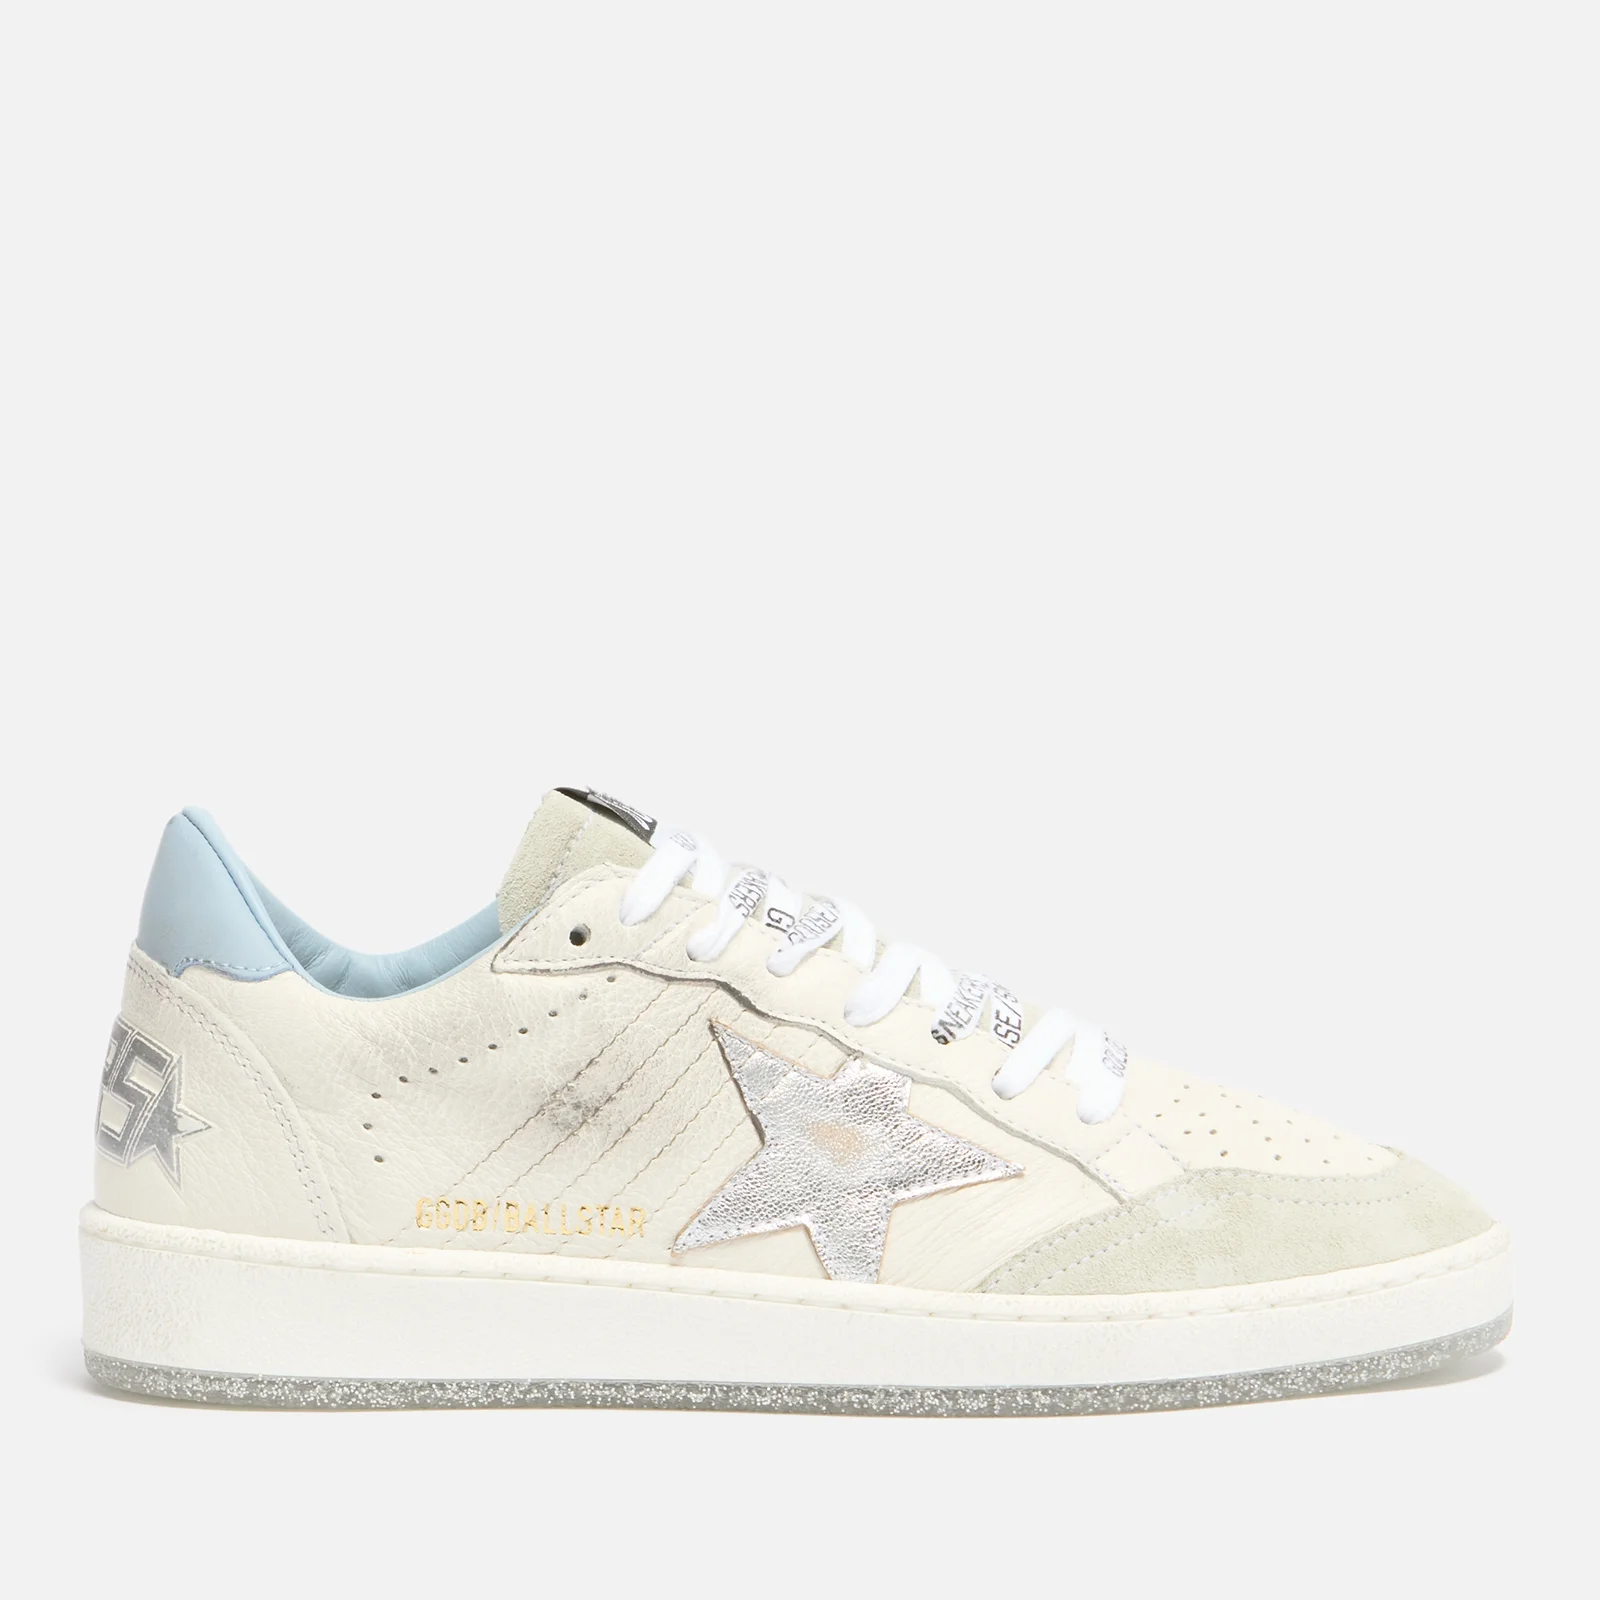 Golden Goose Women's Ball Star Leather Trainers Image 1